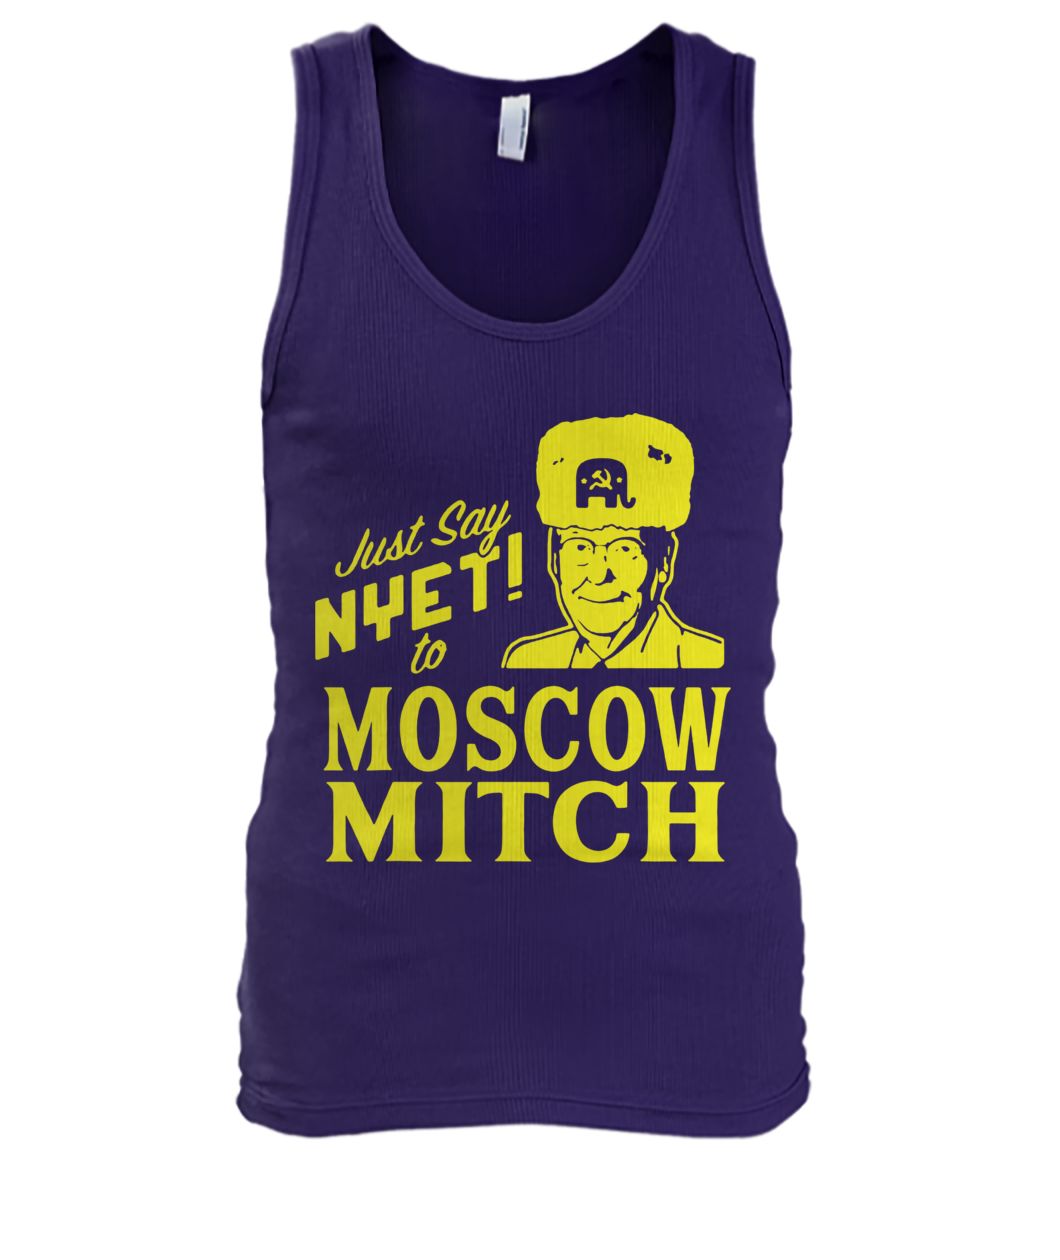 Mitch mcconnell just say nyet to moscow mitch men's tank top